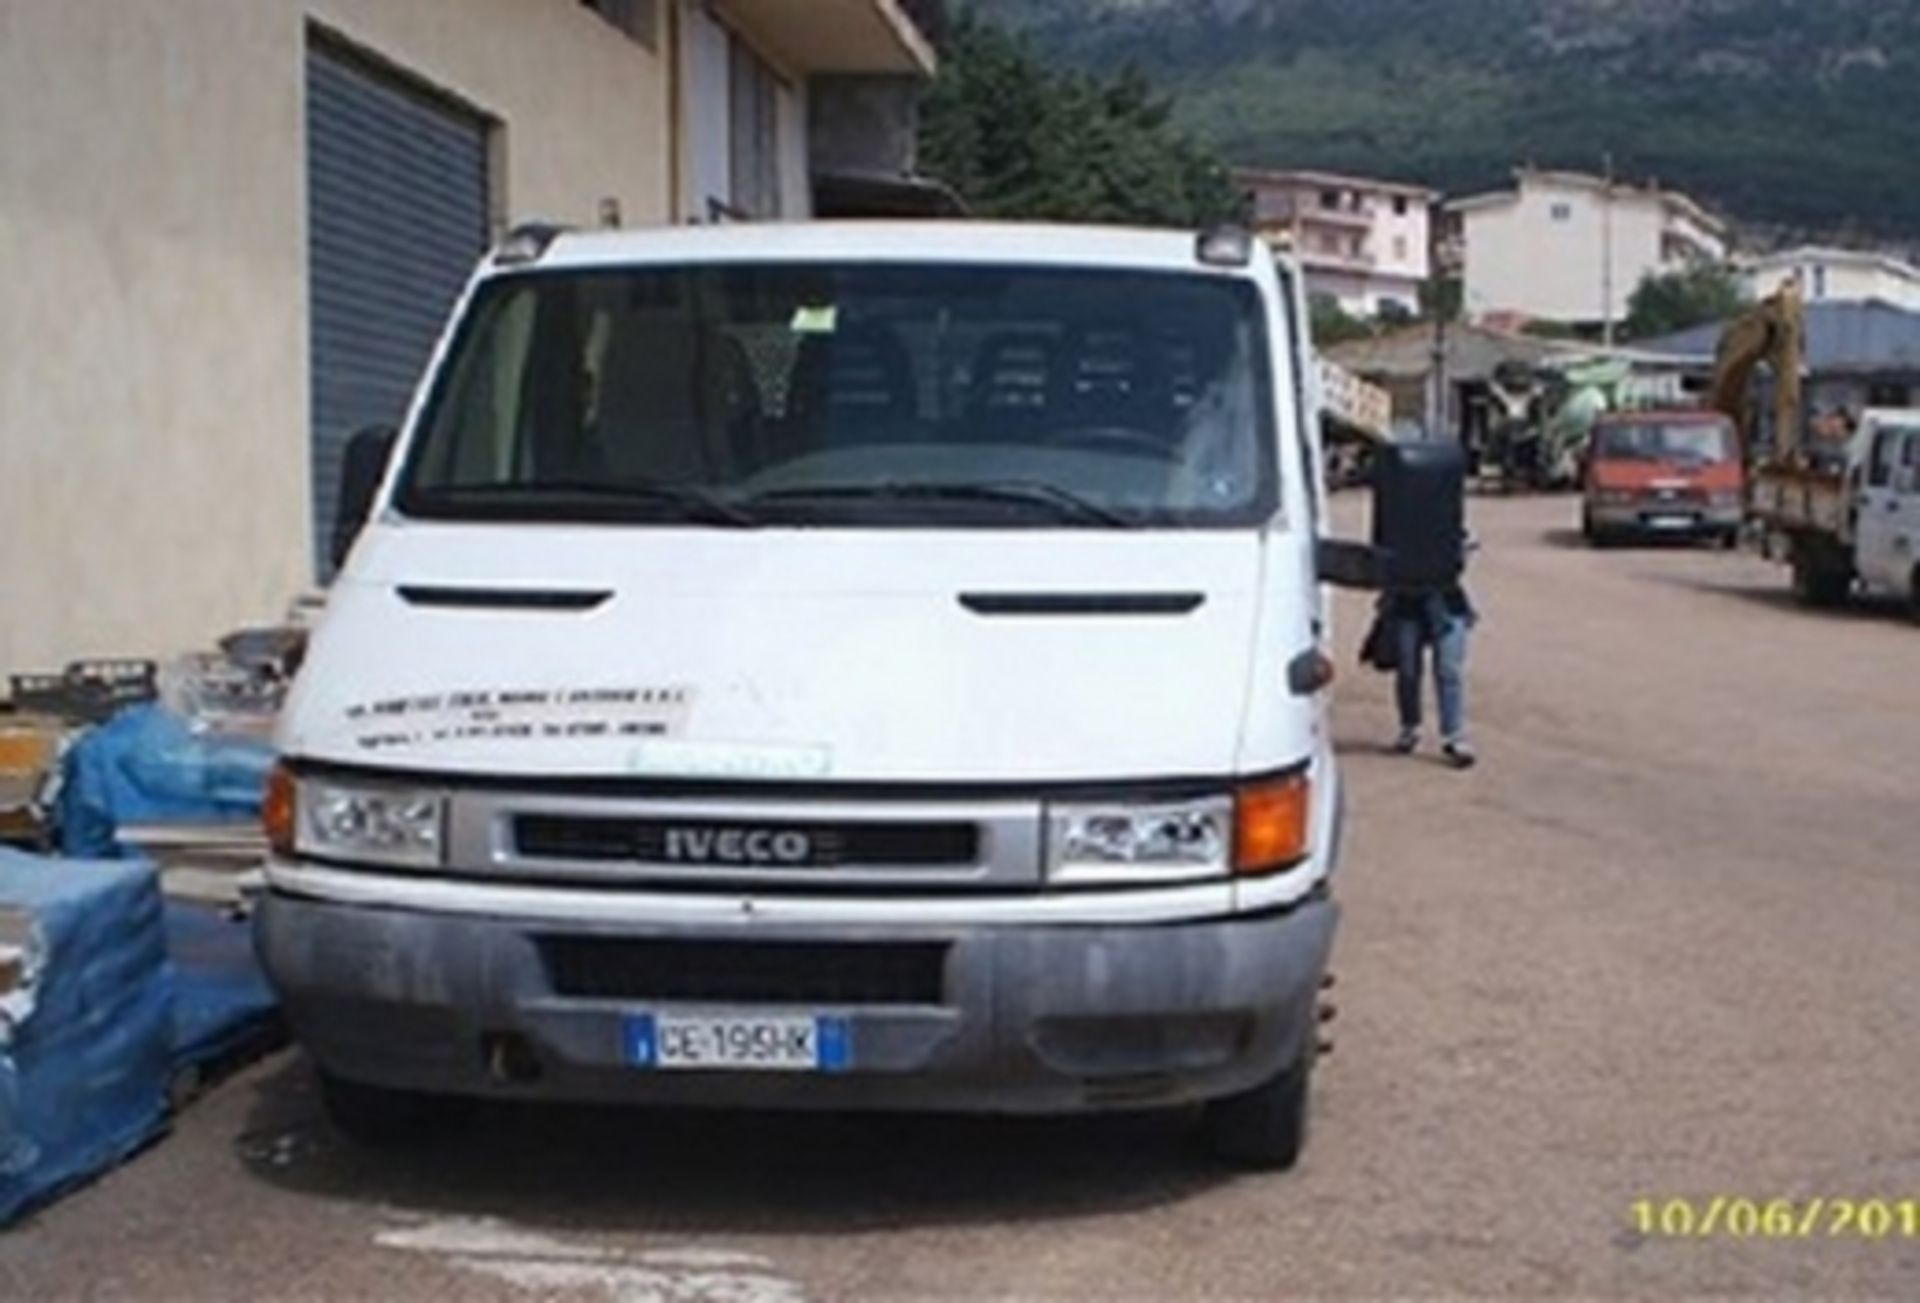 1,Truck Iveco DAILY model 35C9A SILVER 3 plate CE195HK serial n. ZCF3563105411187 date 27/02/2003